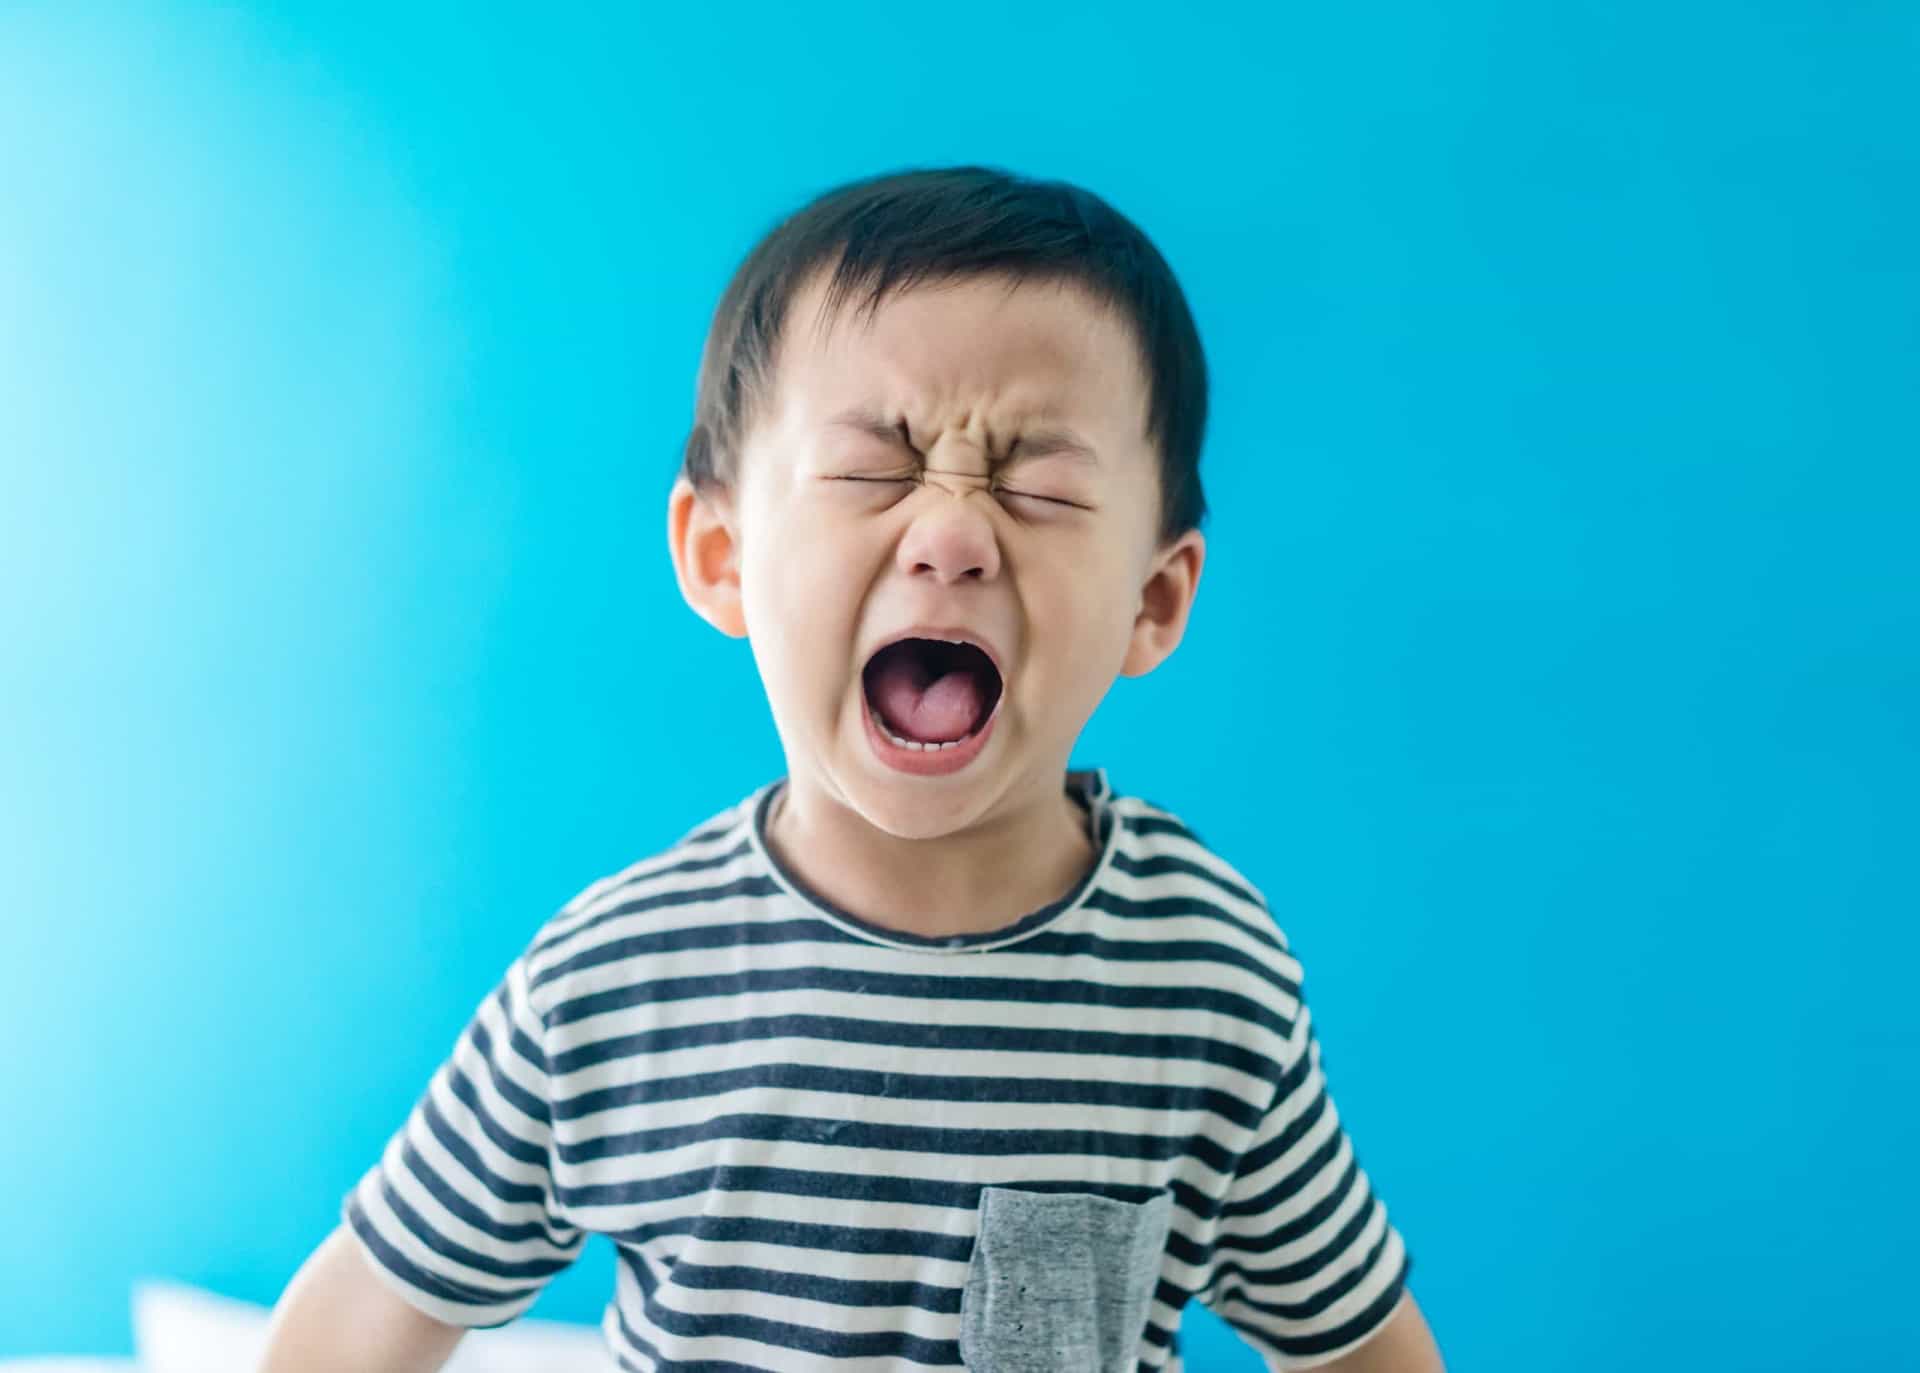 <p><span>A child with selective mutism may avoid eye contact and appear otherwise socially awkward. They may be stubborn or aggressive and more prone to temper tantrums. </span></p><p>You may also like:<a href="https://www.starsinsider.com/n/254530?utm_source=msn.com&utm_medium=display&utm_campaign=referral_description&utm_content=521574en-sg"> Surprisingly cheap honeymoon destinations</a></p>